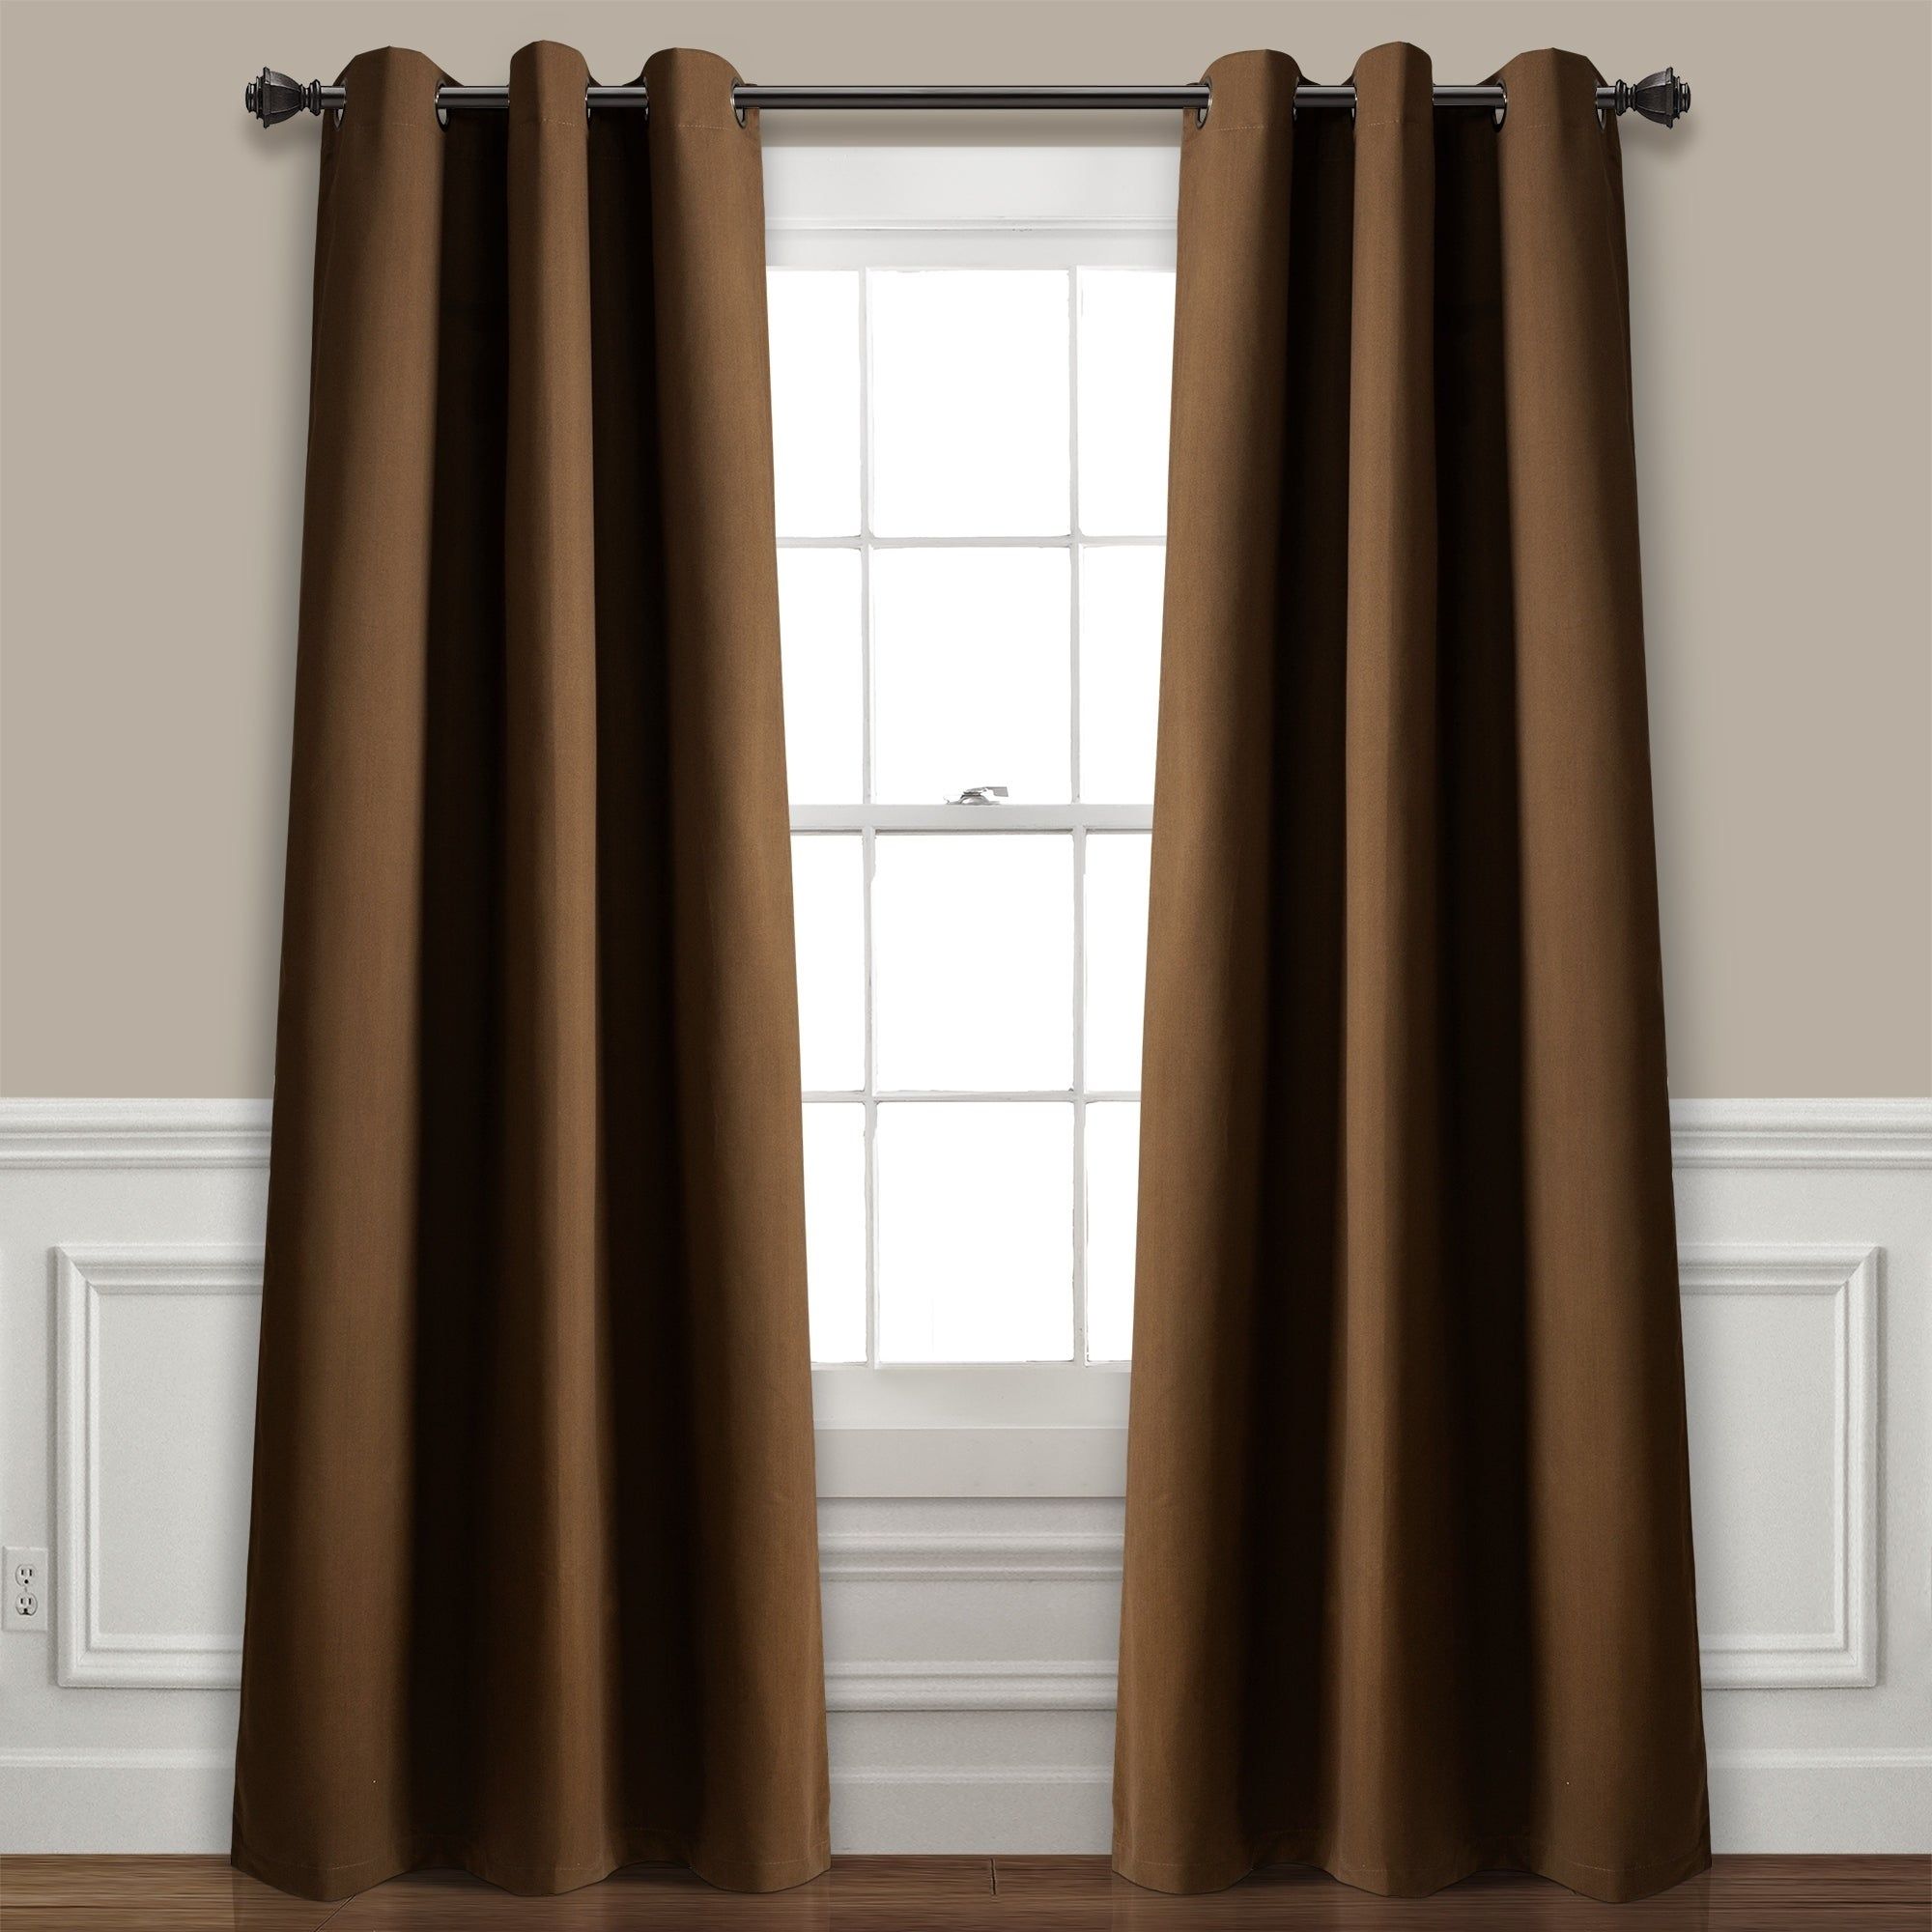 Lush Decor Absolute Blackout Window Curtain Panel Pair Intended For Velvet Solid Room Darkening Window Curtain Panel Sets (View 28 of 30)